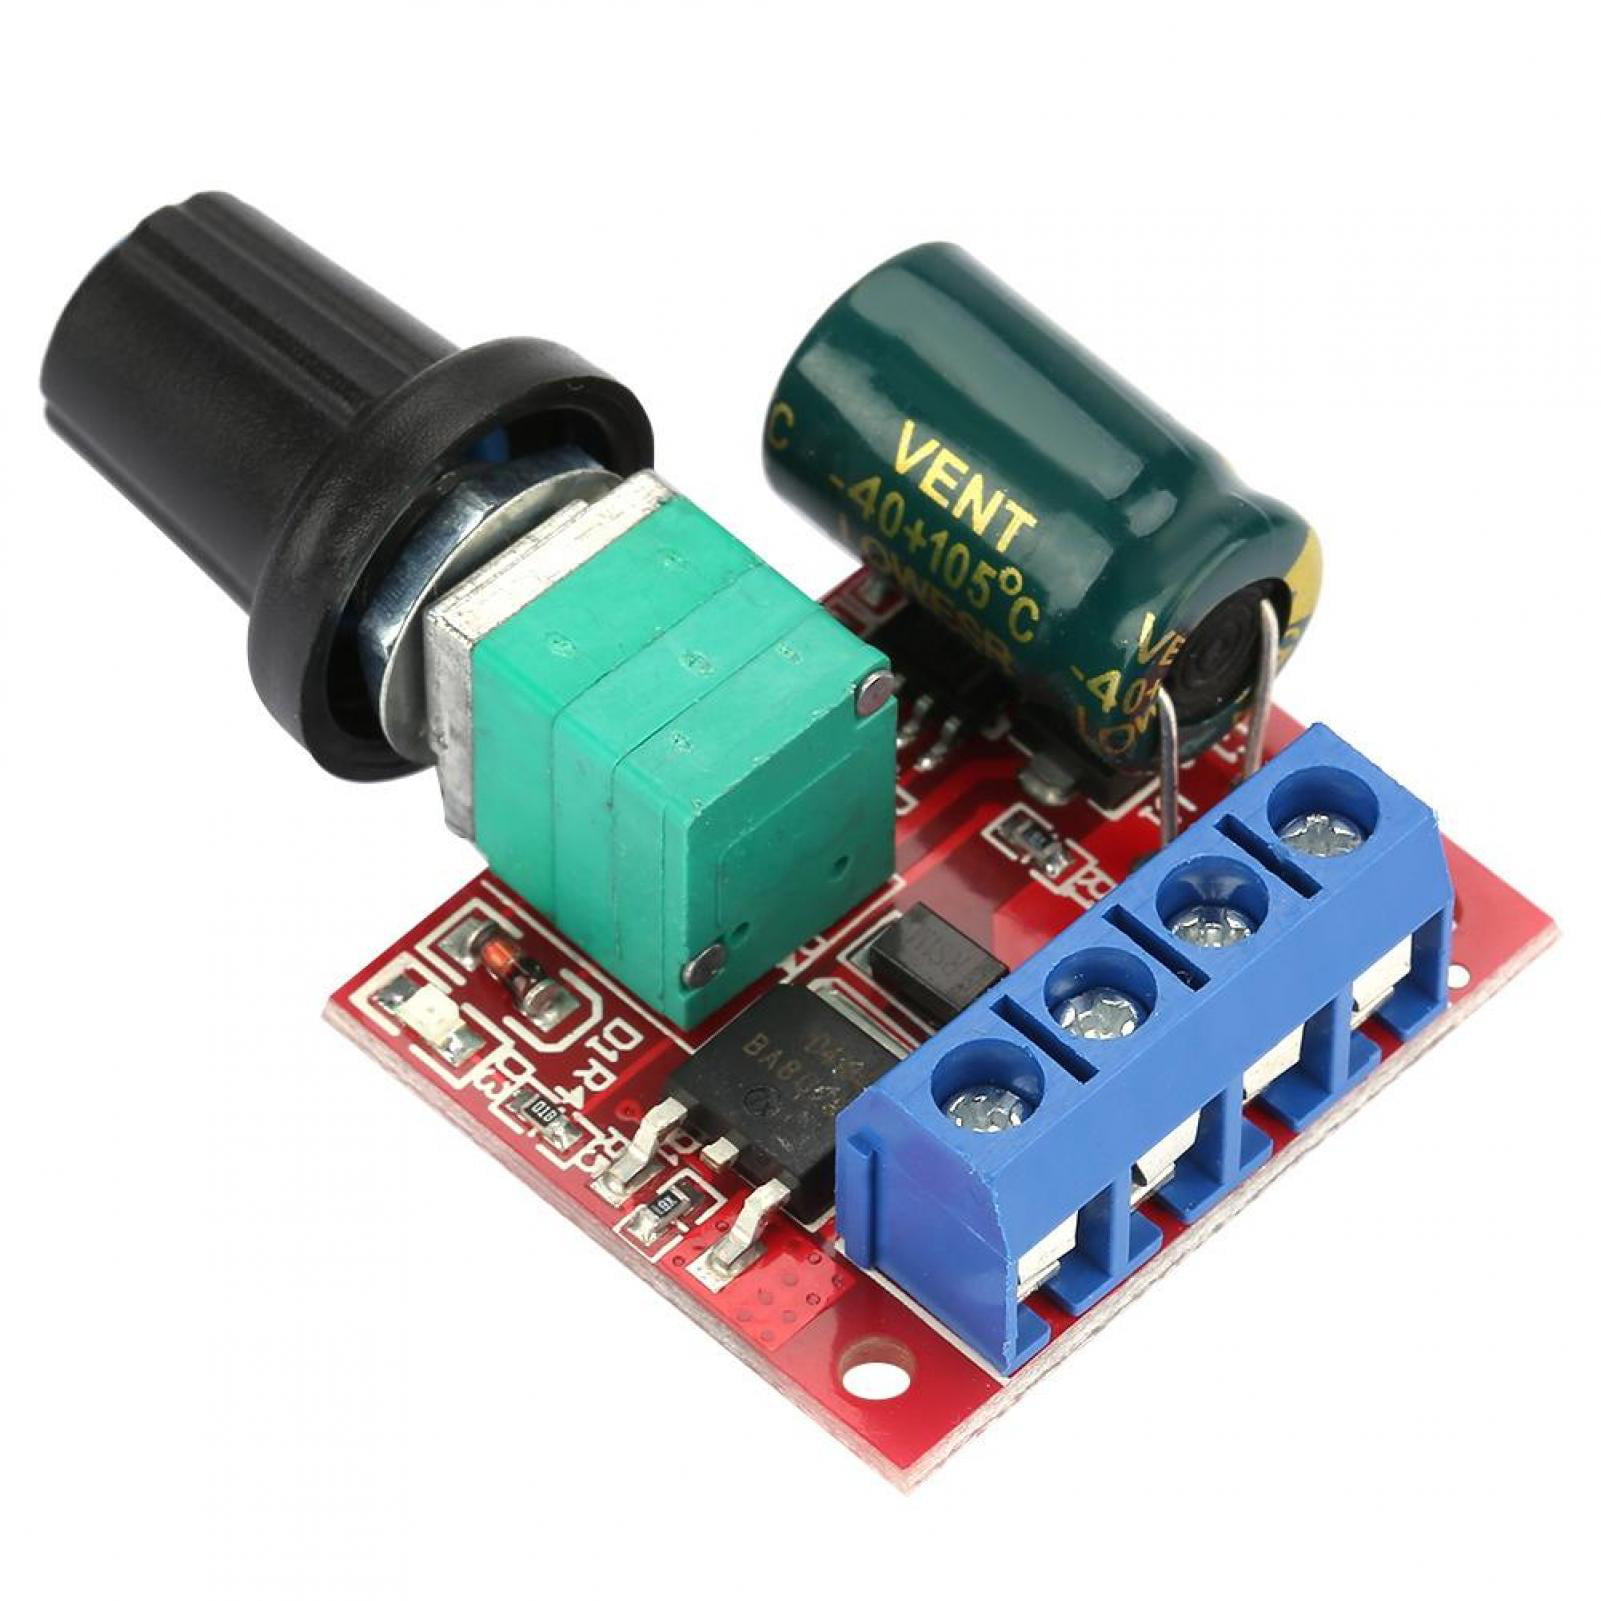 Mini DC Motor PWM Speed Controller 5A 4.5V-35V Speed Control Switch LED Dimmer X 